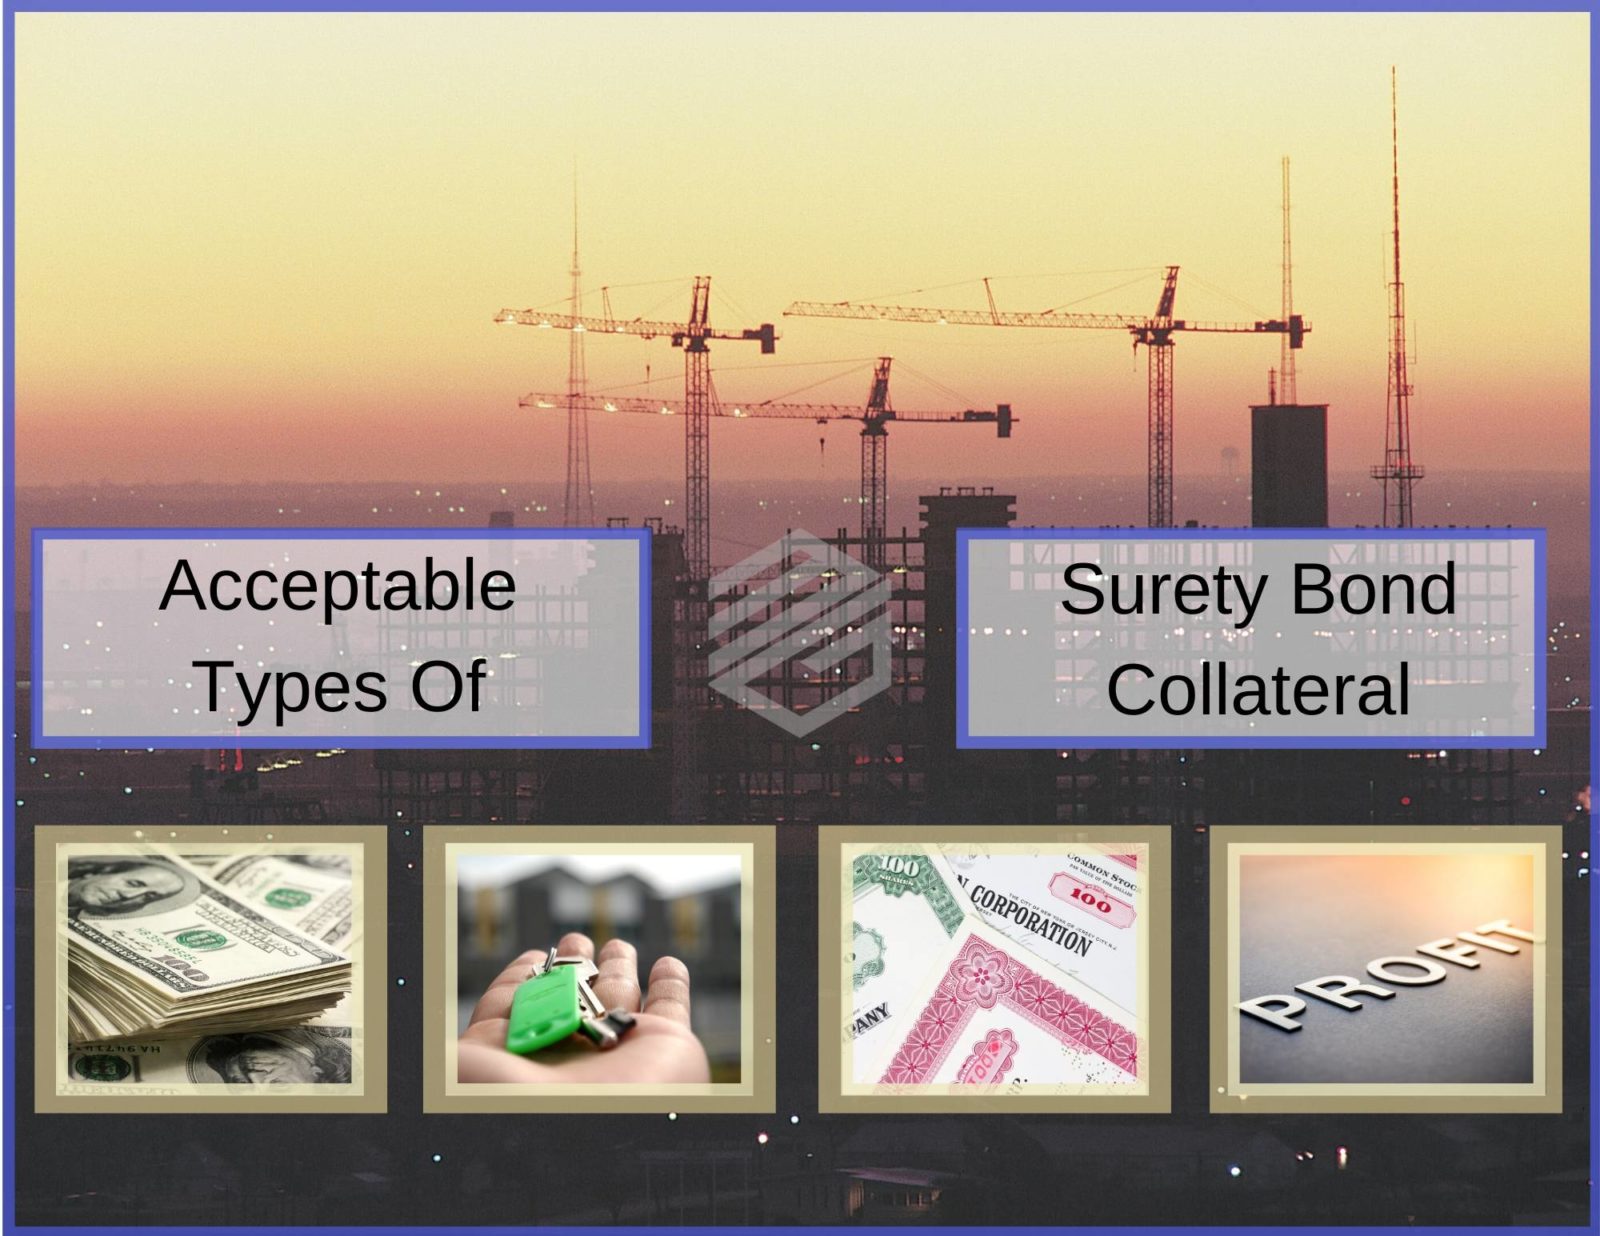 Surety Bond Collateral - 4 pictures of common types of surety bond collateral including profit, cash, real estate and stocks. These are in 4 separate boxes with a construction site in the background during sunset.